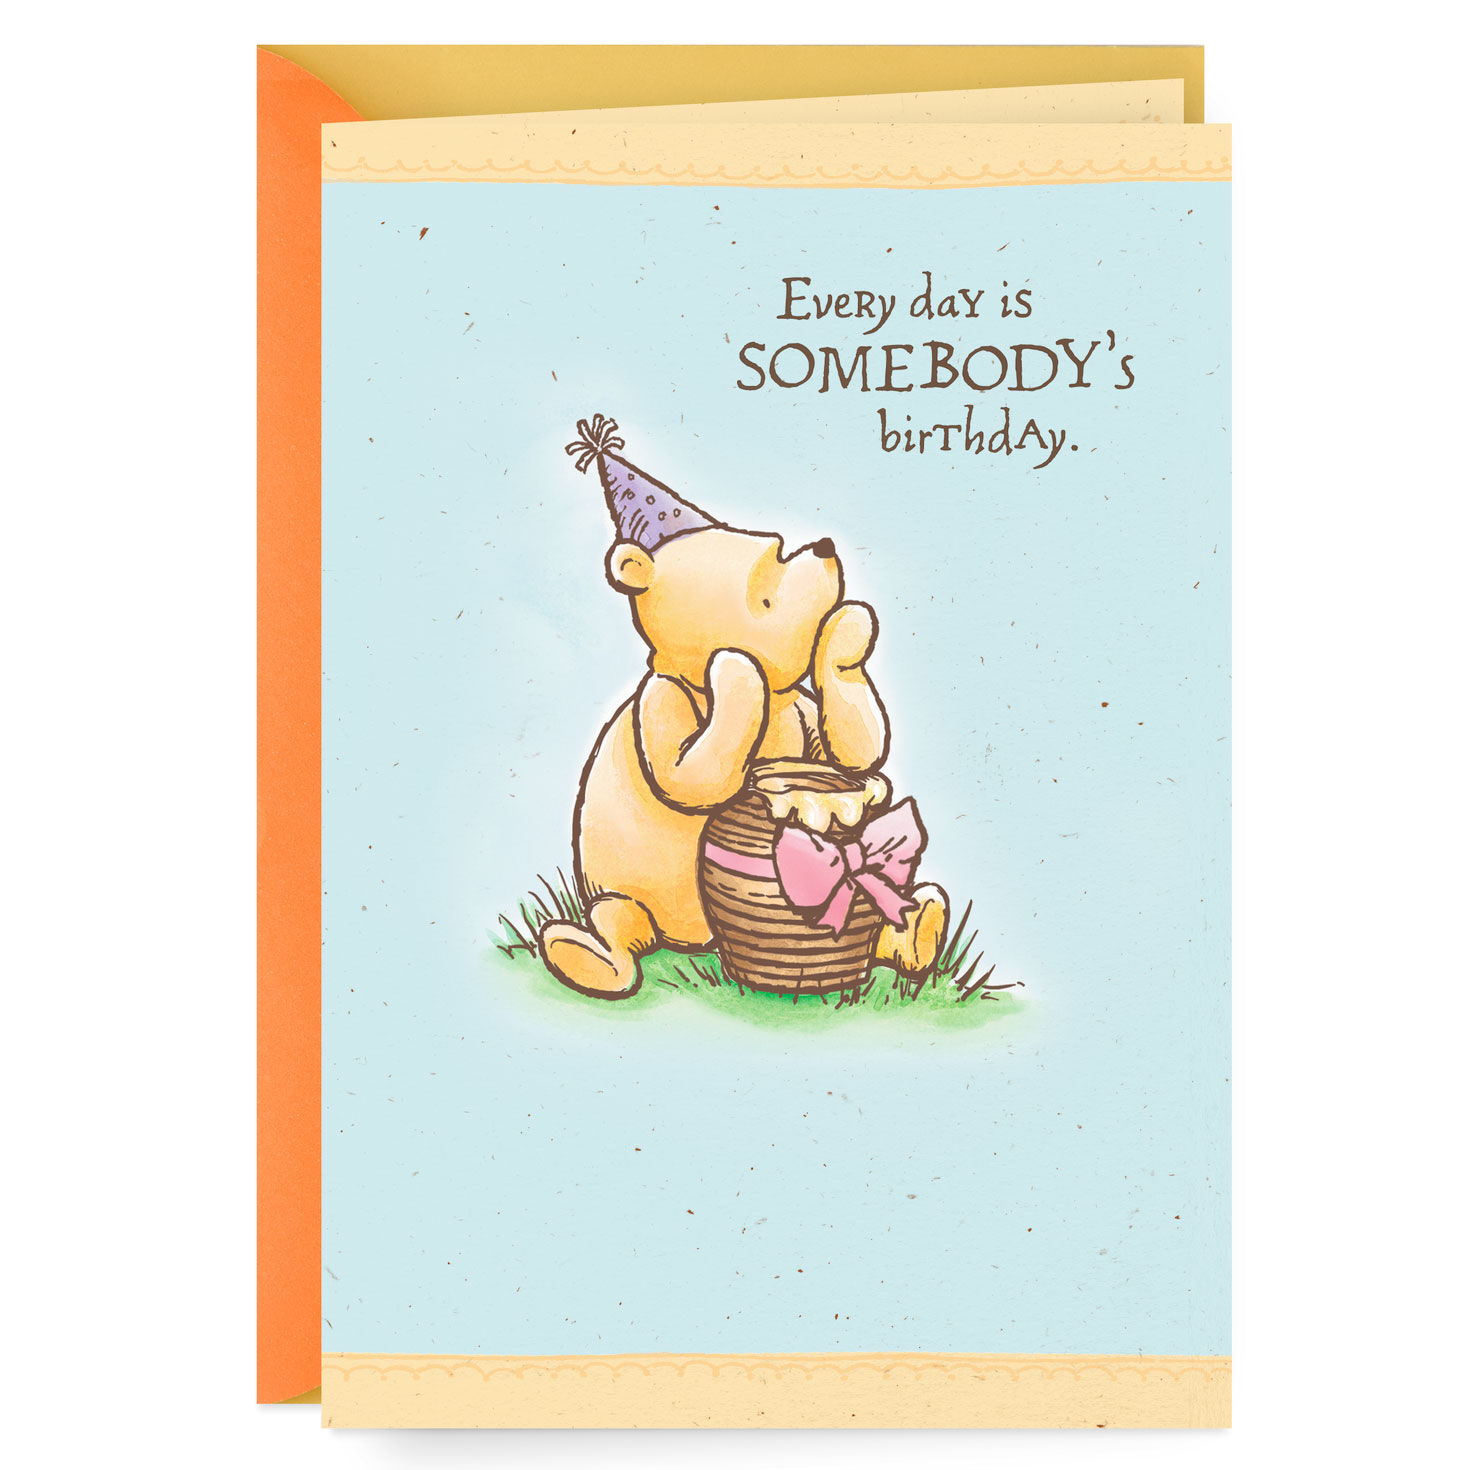 Winnie the Pooh Greeting card for Birthday or anniversary